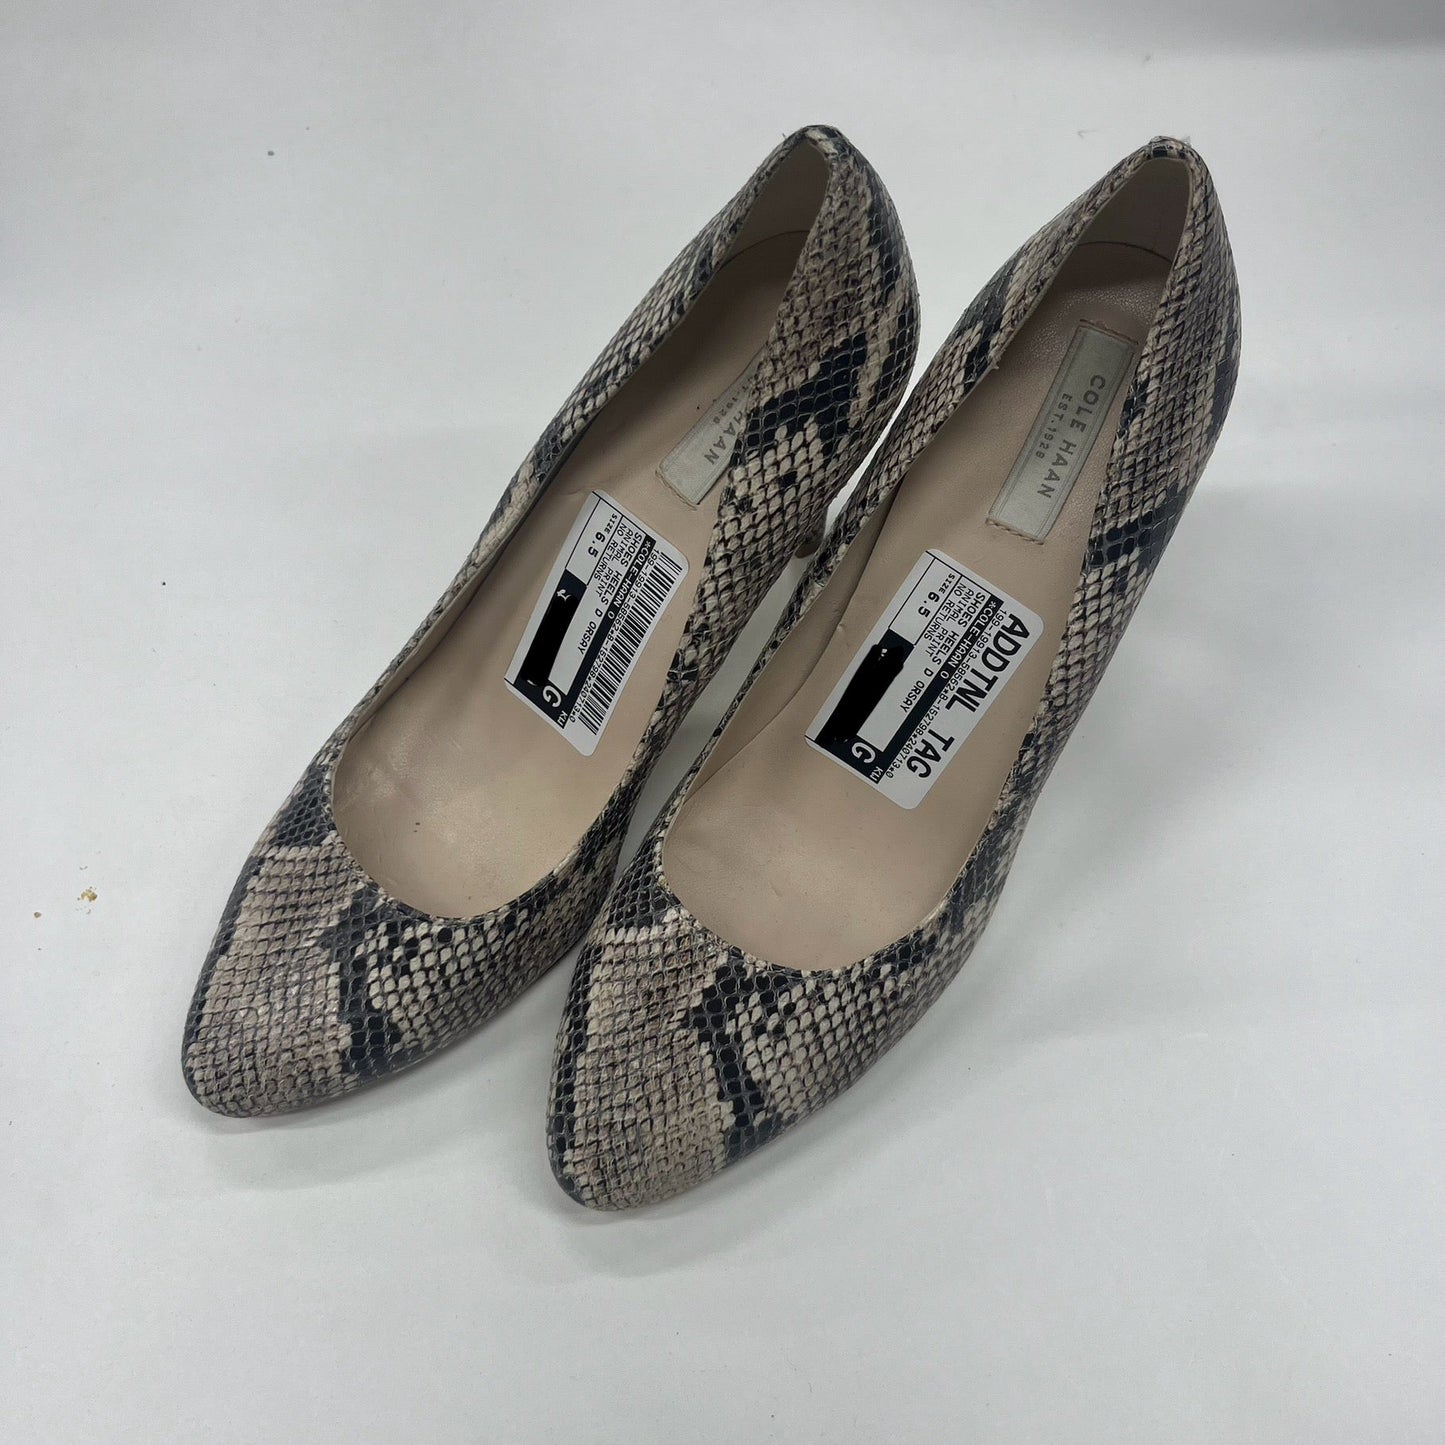 Animal Print Shoes Heels D Orsay Cole-haan O, Size 6.5